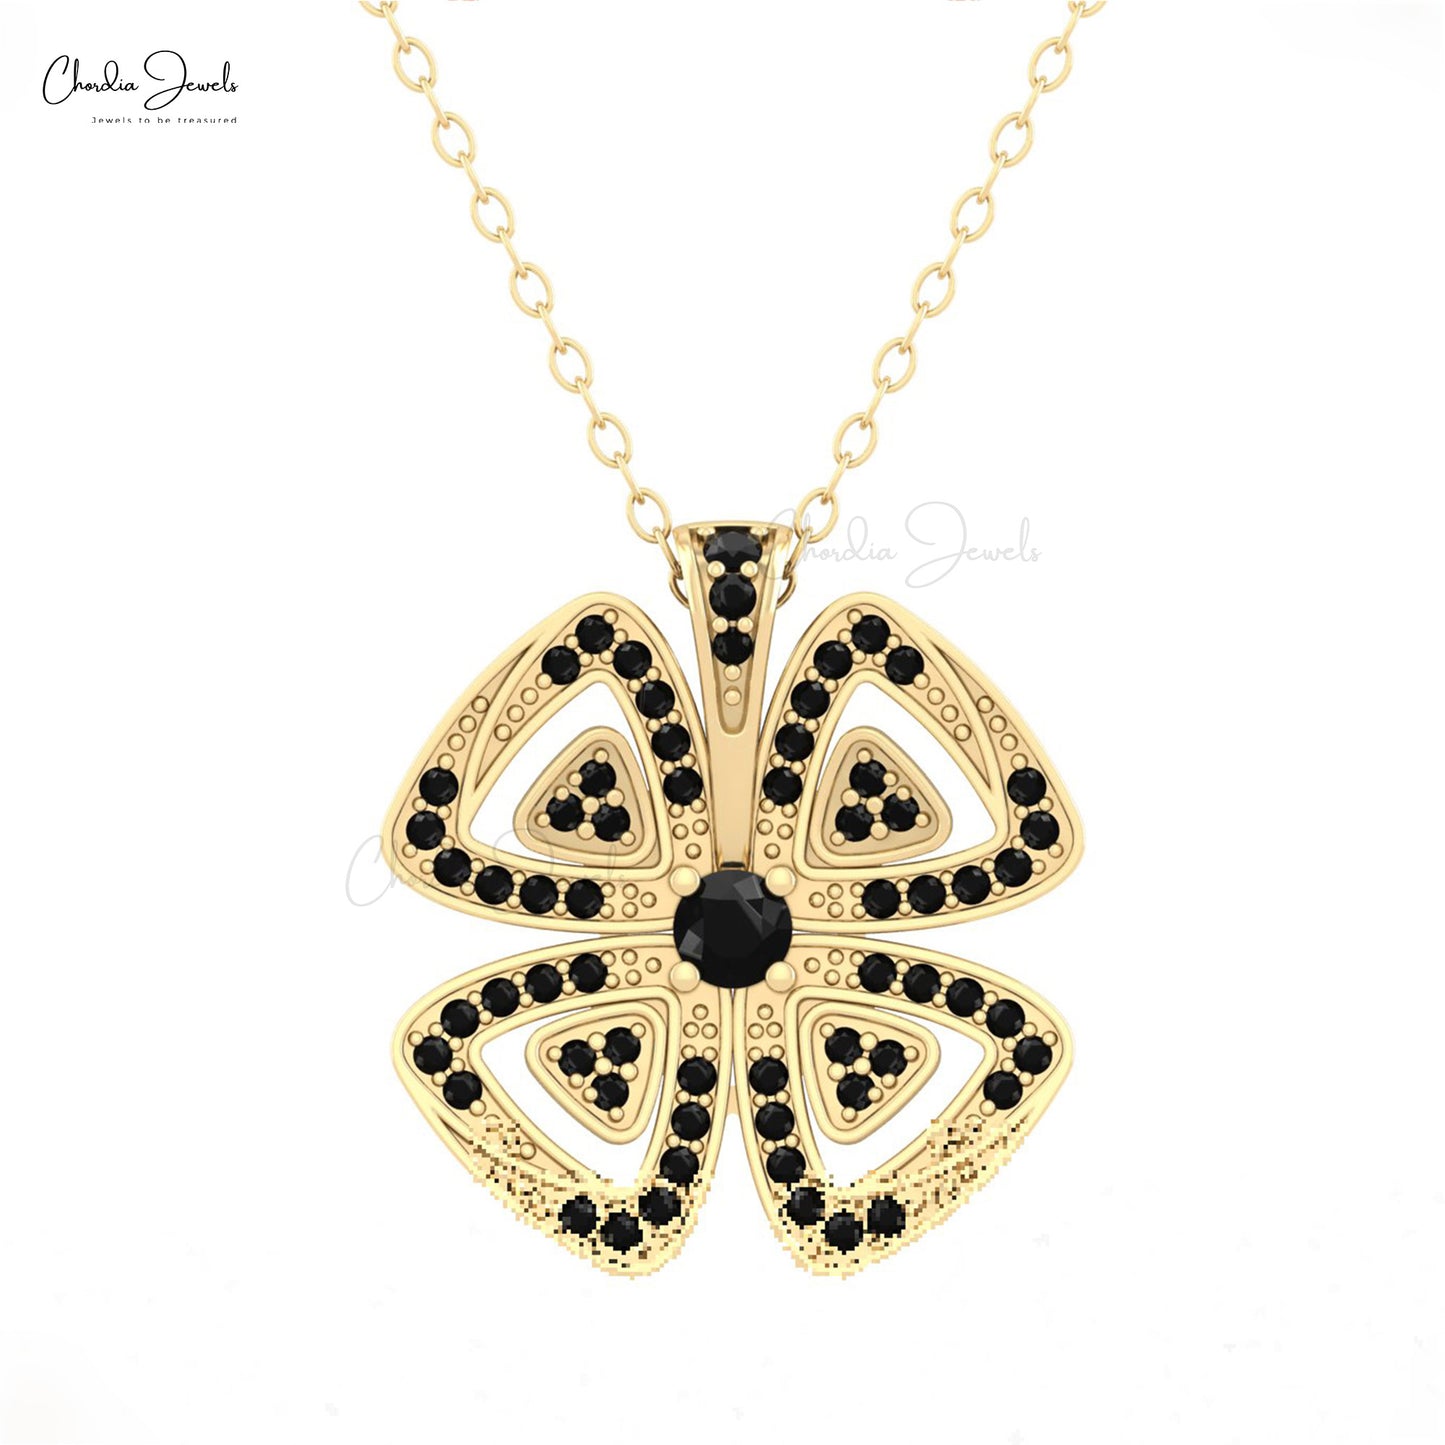 Creative Handmade 14k Pure Gold Pendant Authentic Black Diamond Floral Pendant Necklace For Women Light Weight Jewelry For Birthday Gift